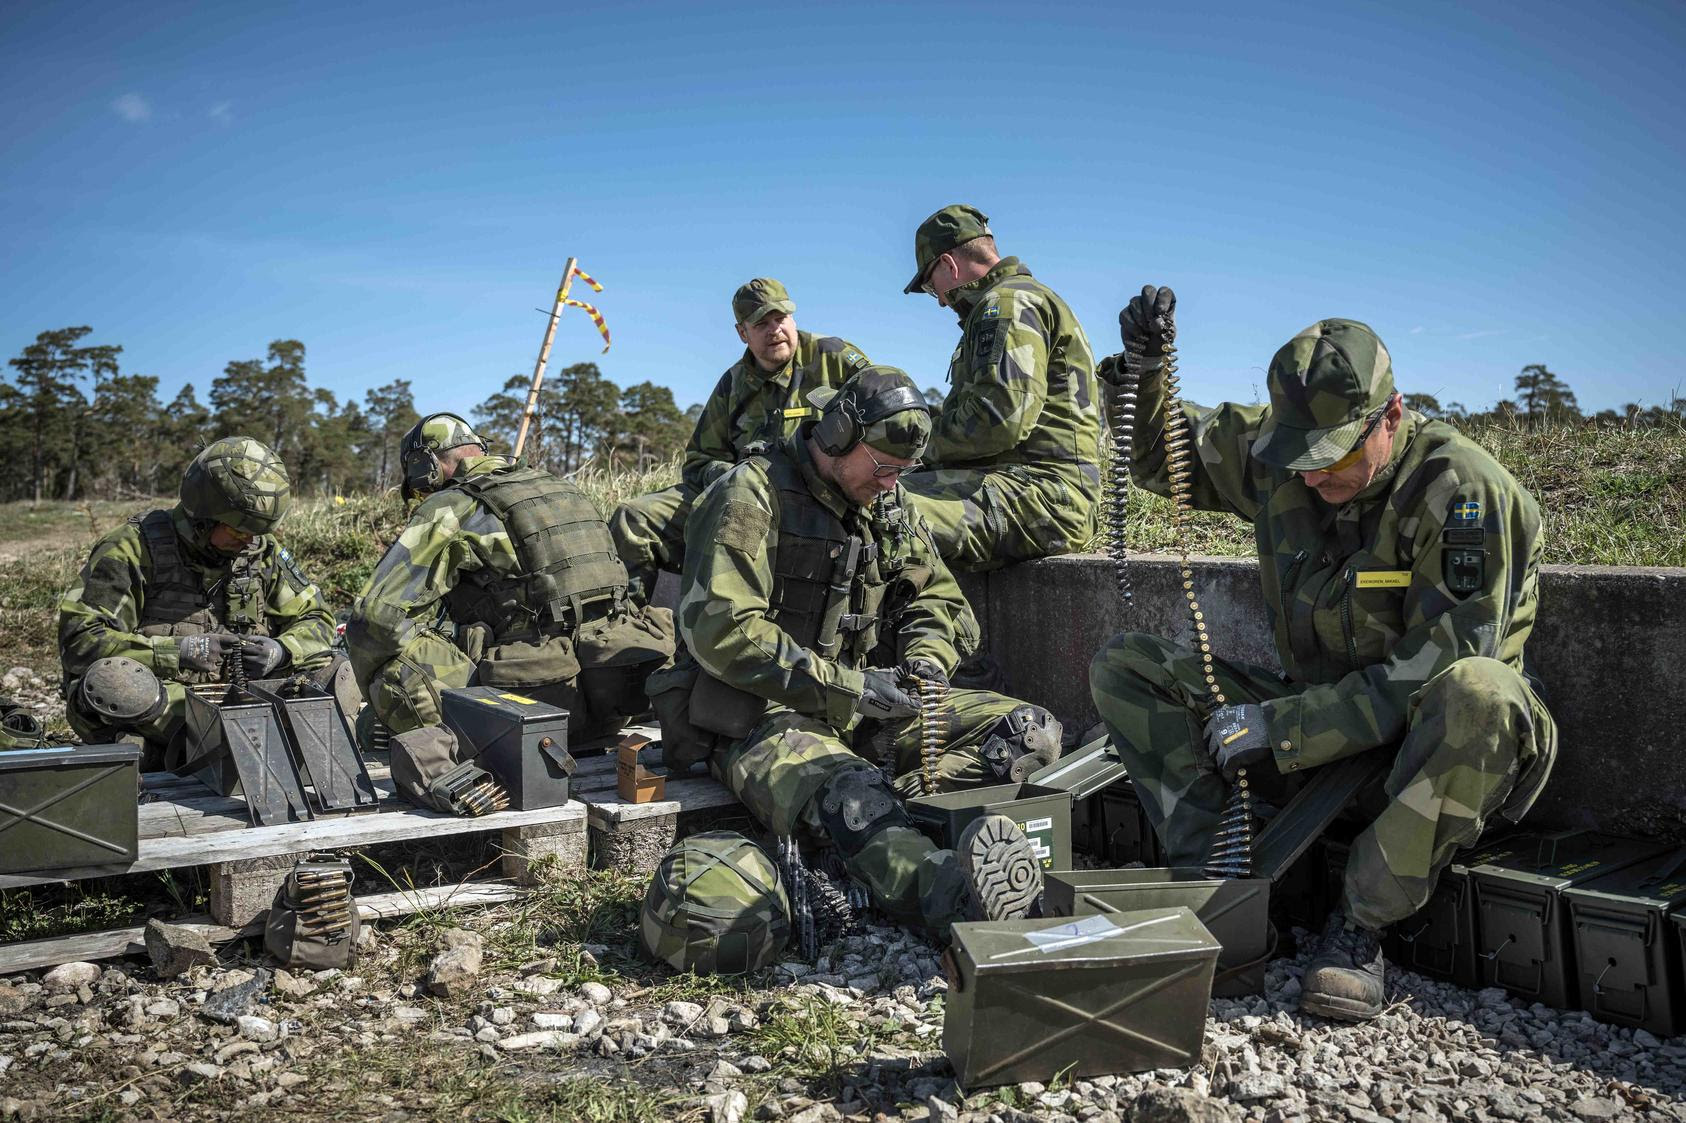 Troops with the Gotland regiment of the Swedish Army reload their machine guns during target practice on Gotland Island, Sweden, on May 11, 2022. (Sergey Ponomarev/The New York Times)